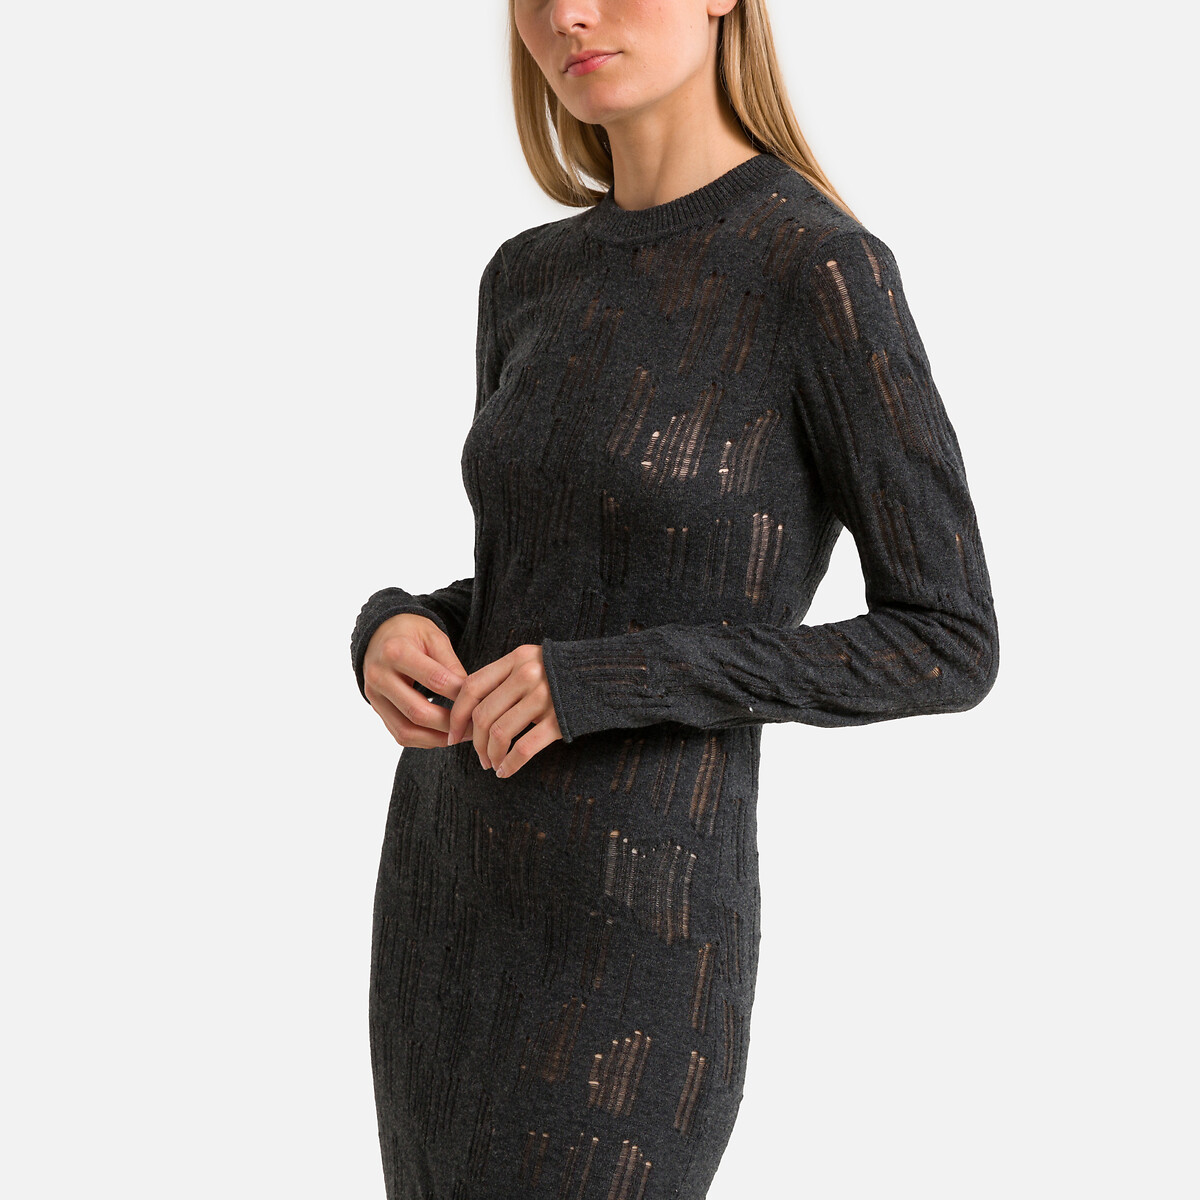 Caleb Wool/Cotton Dress with High Neck and Long Sleeves